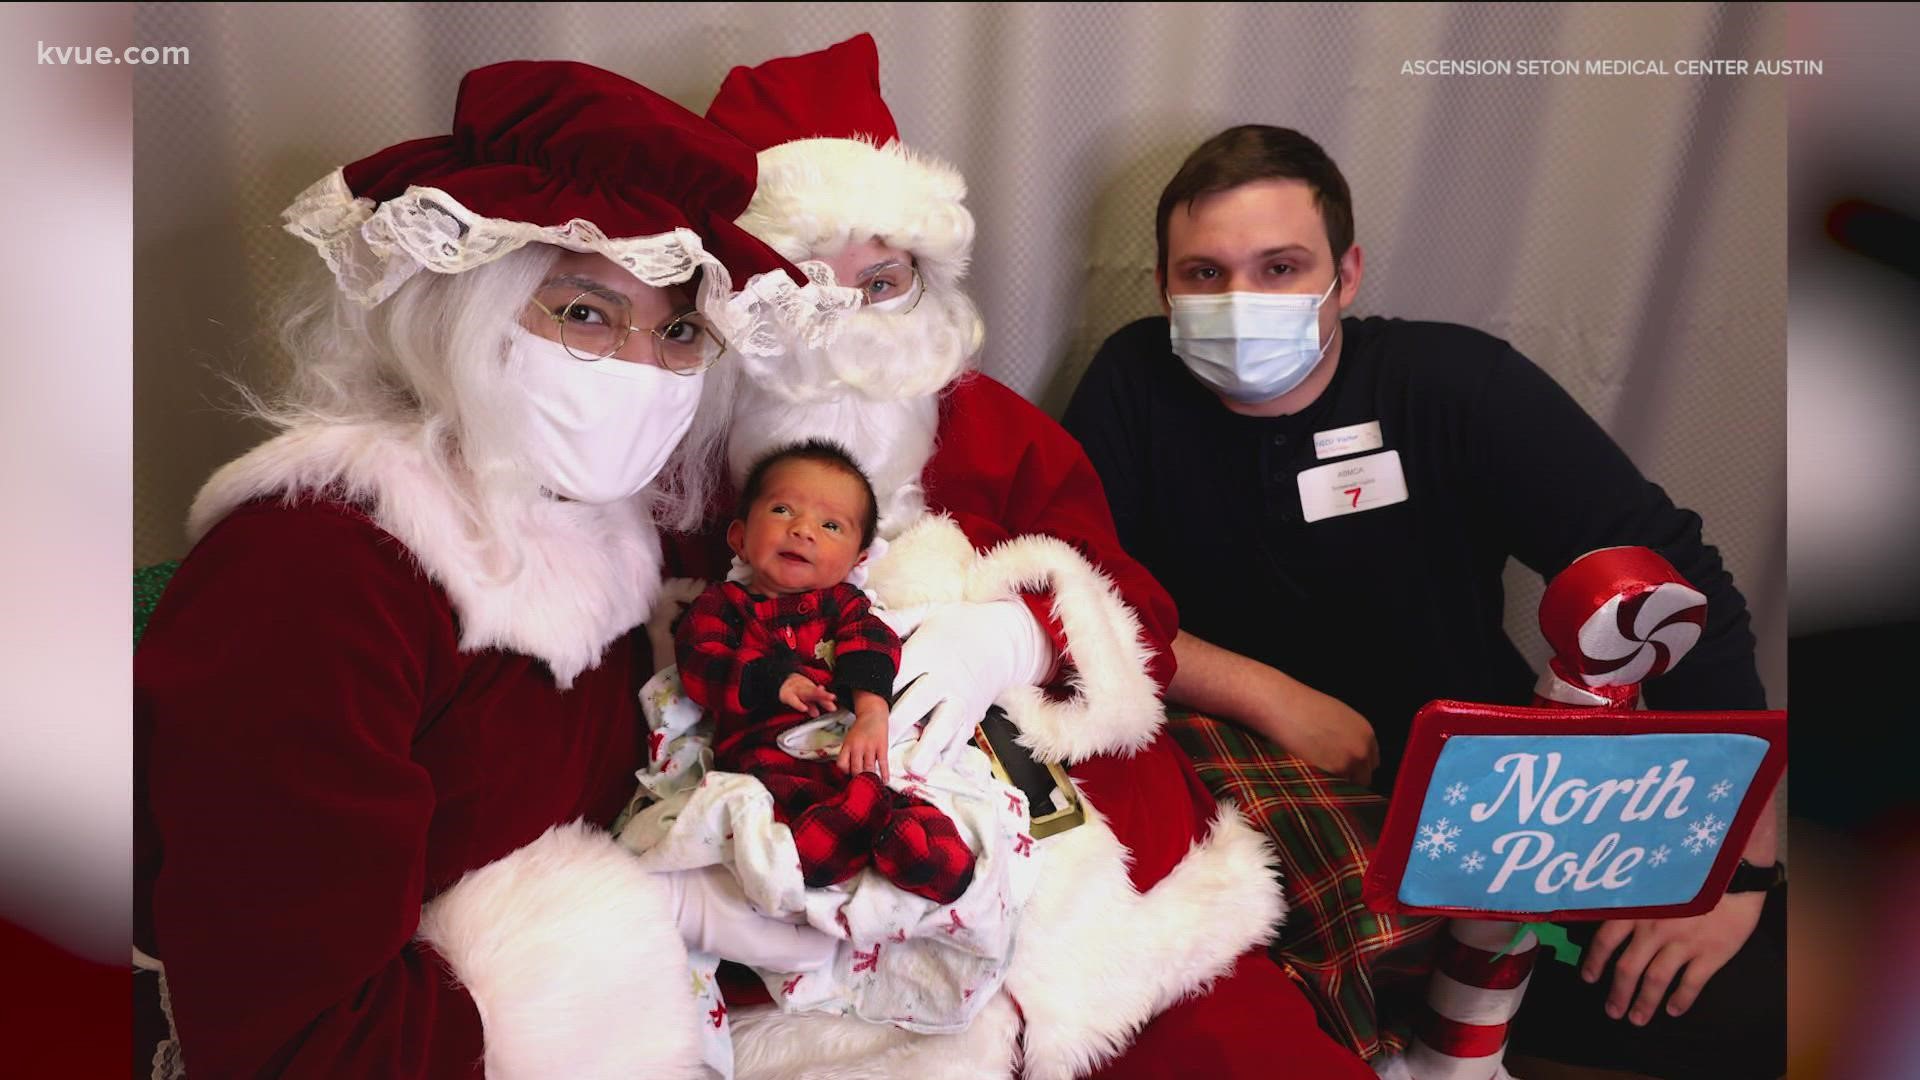 Babies were dressed in holiday outfits for their very first picture with Santa.